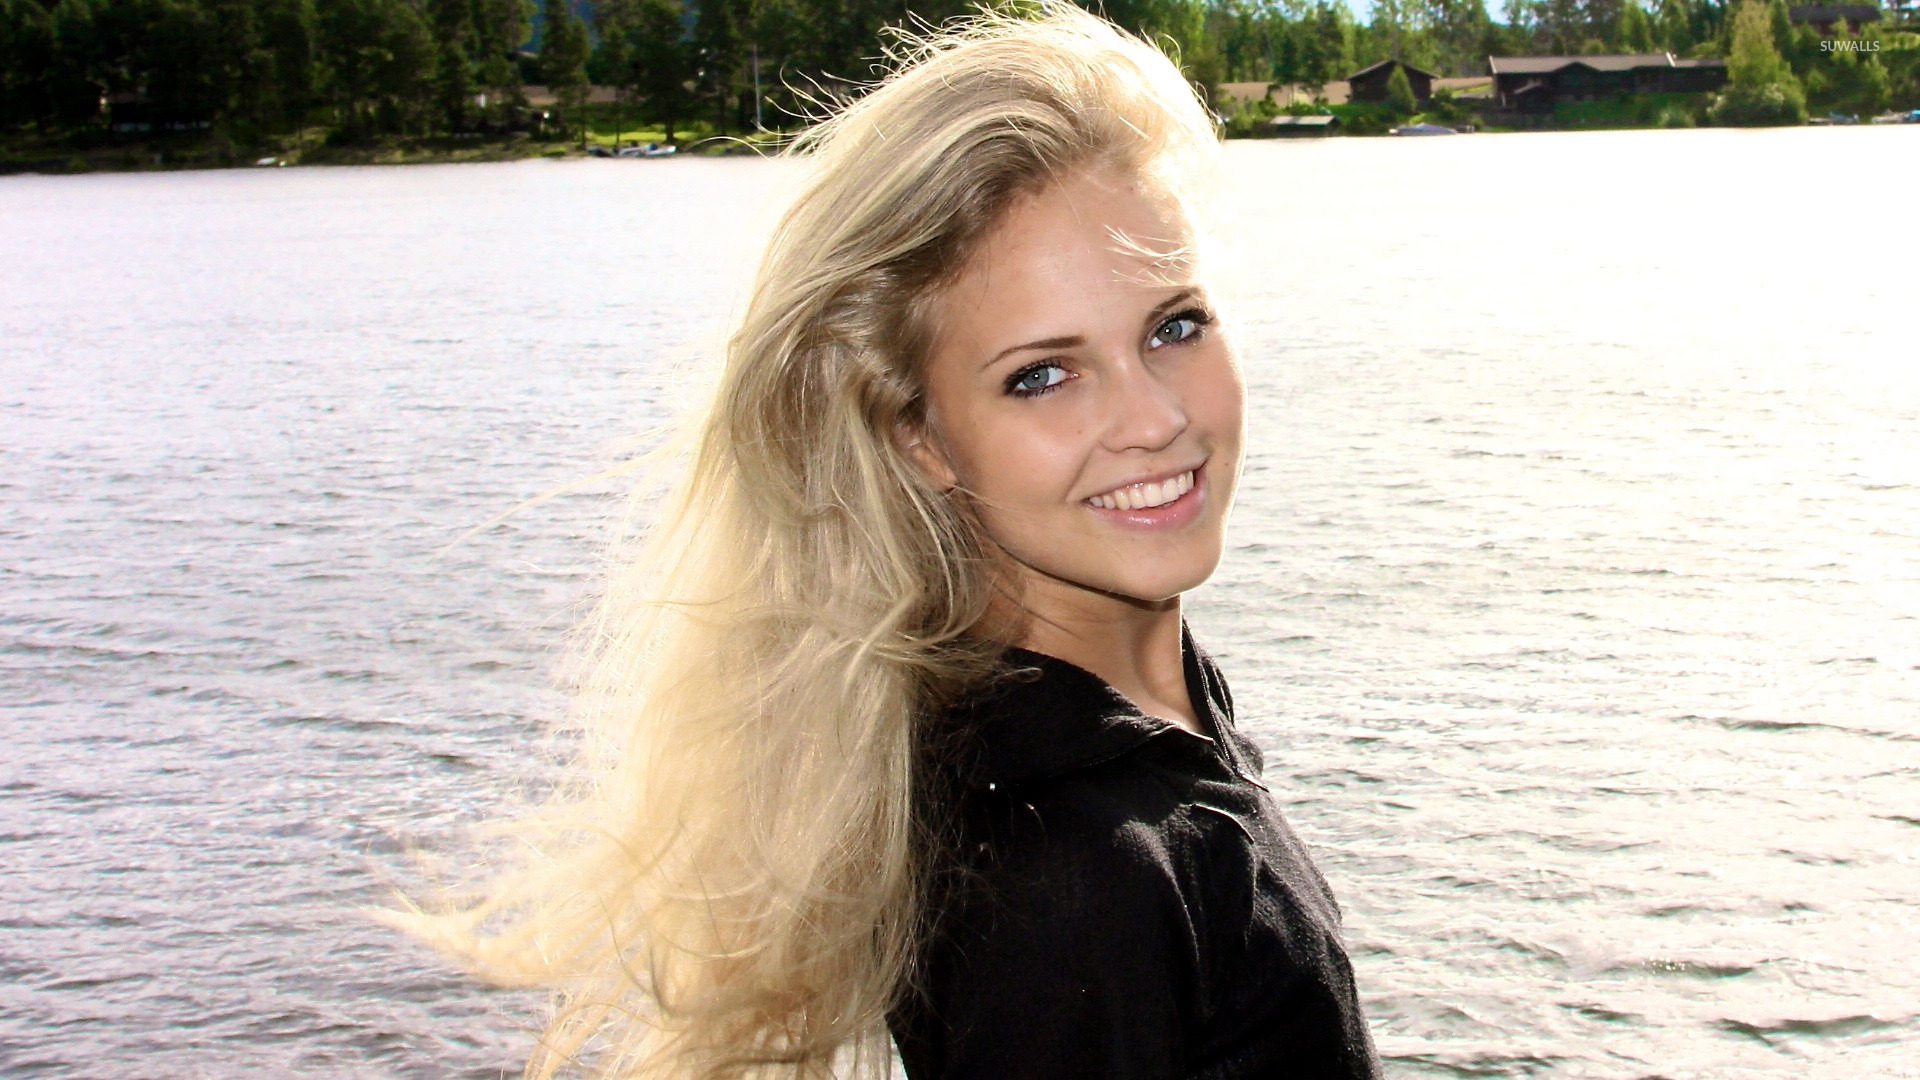 Emilie Marie Nereng Wallpapers